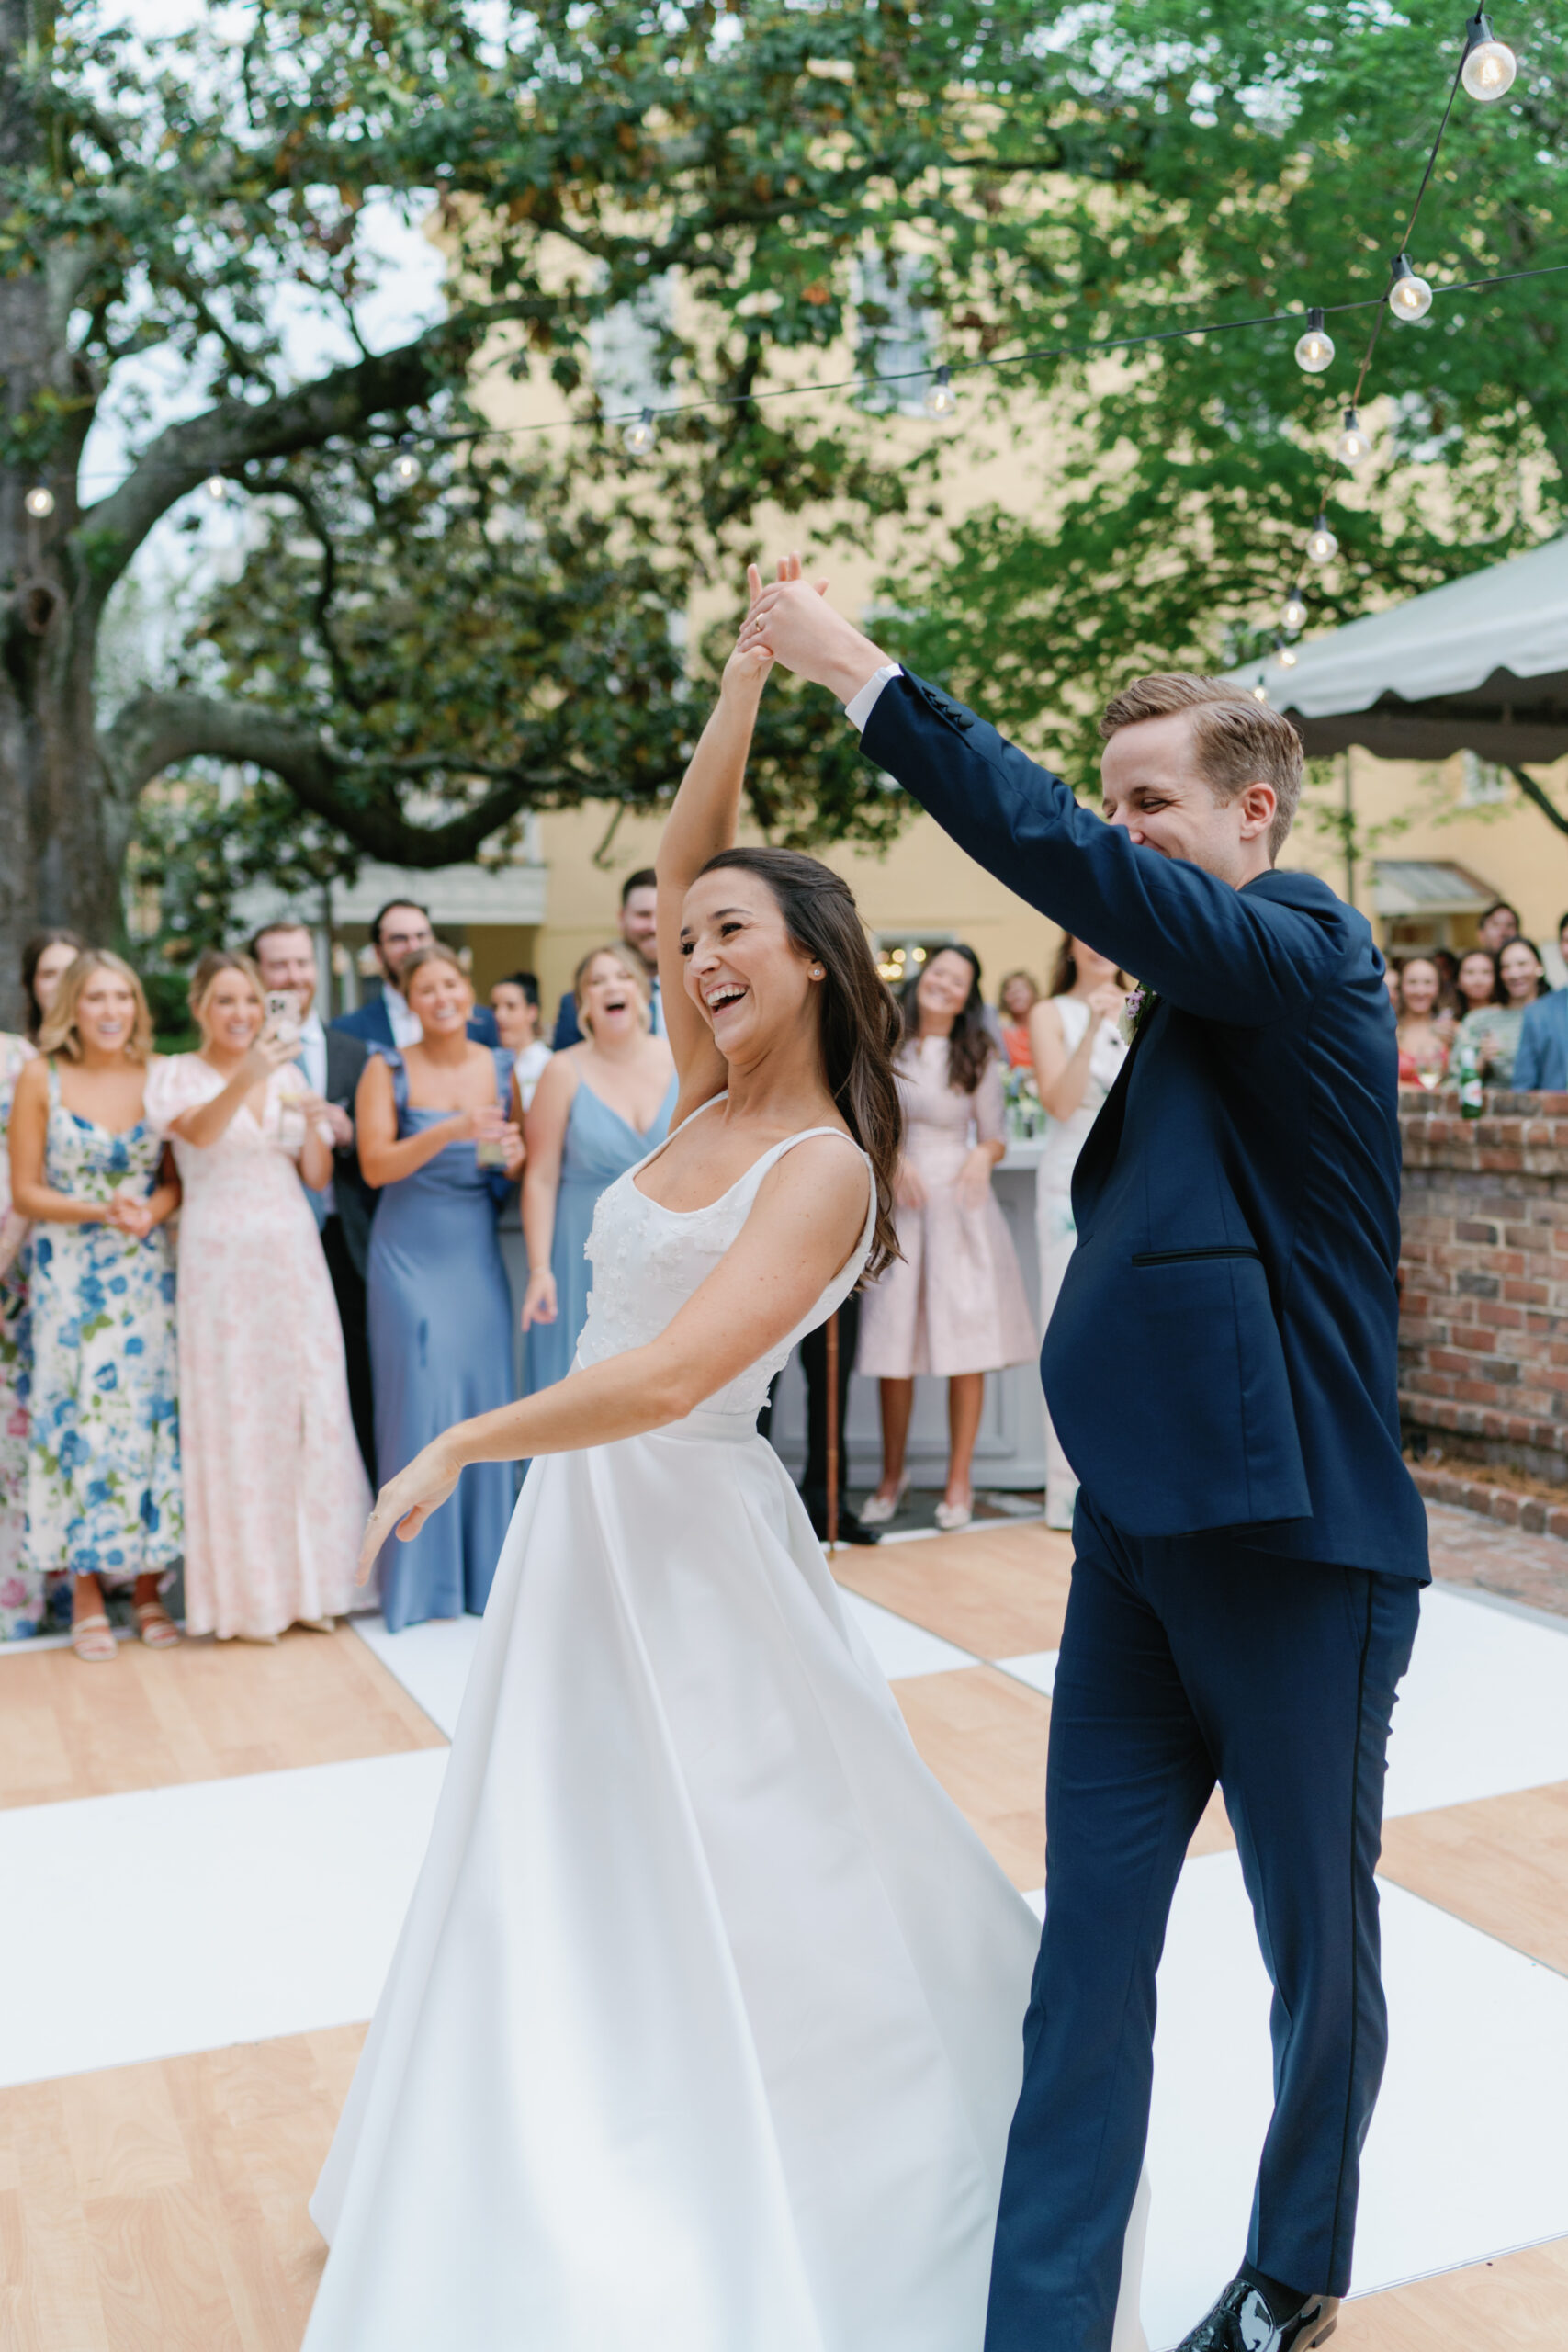 First dance spin. Groom spins the bride during first dance at William Aiken House wedding. Photographers charleston